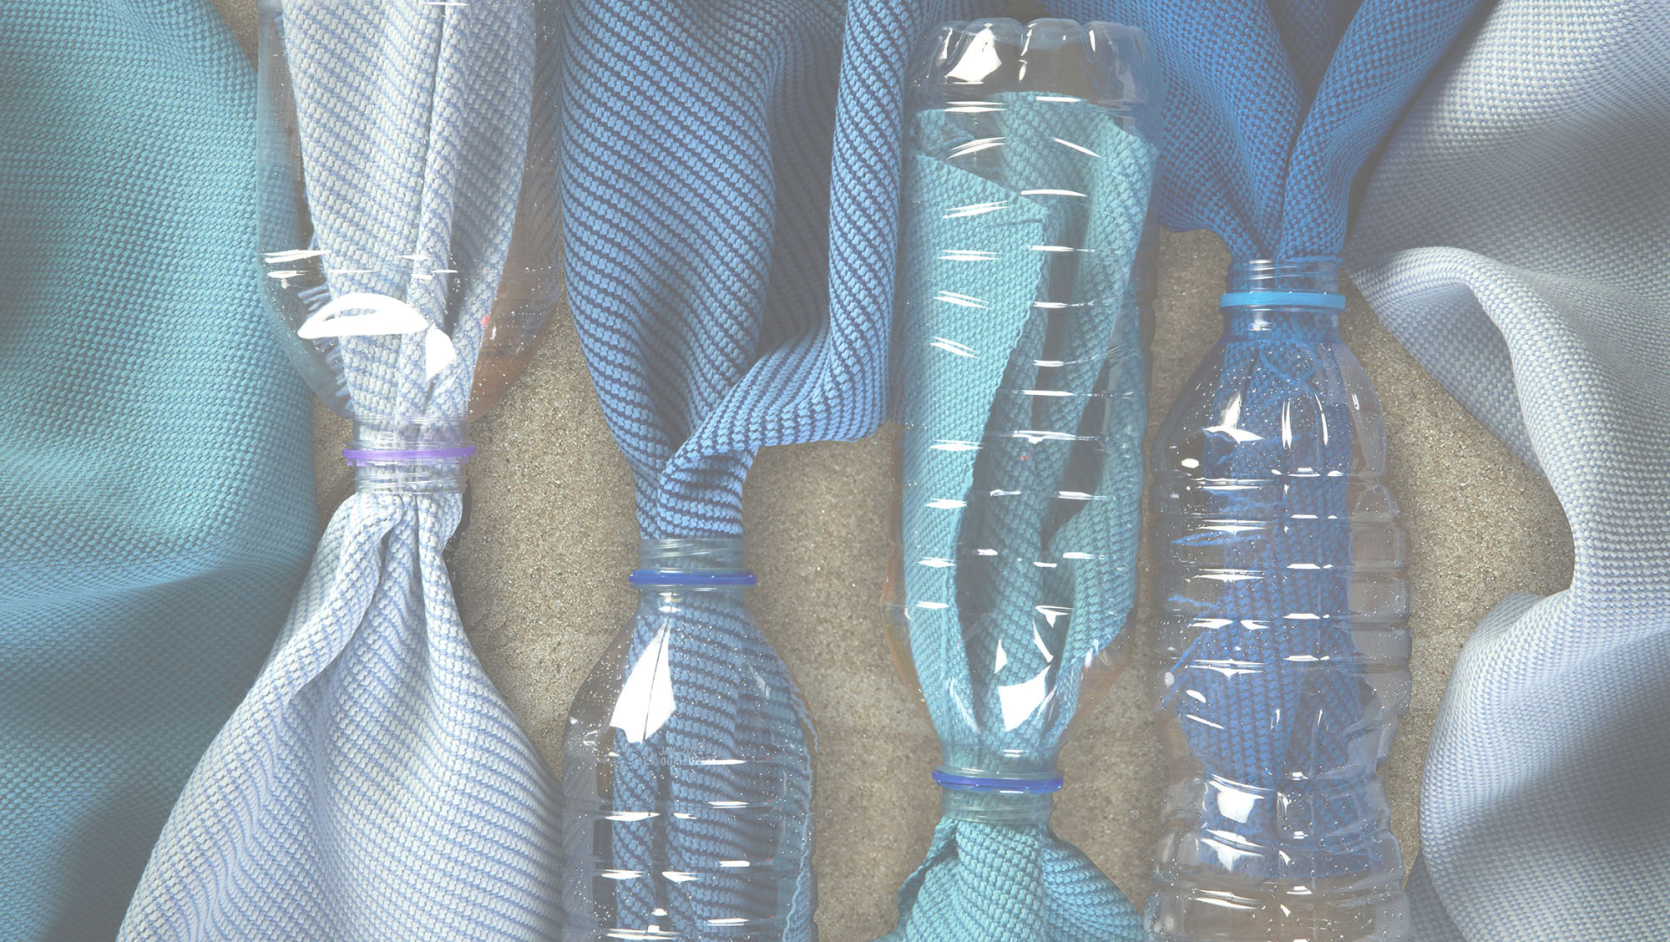 SUSTAINABILITY THIS WEEK: THE UPCOMING DILEMMA FOR TEXTILES